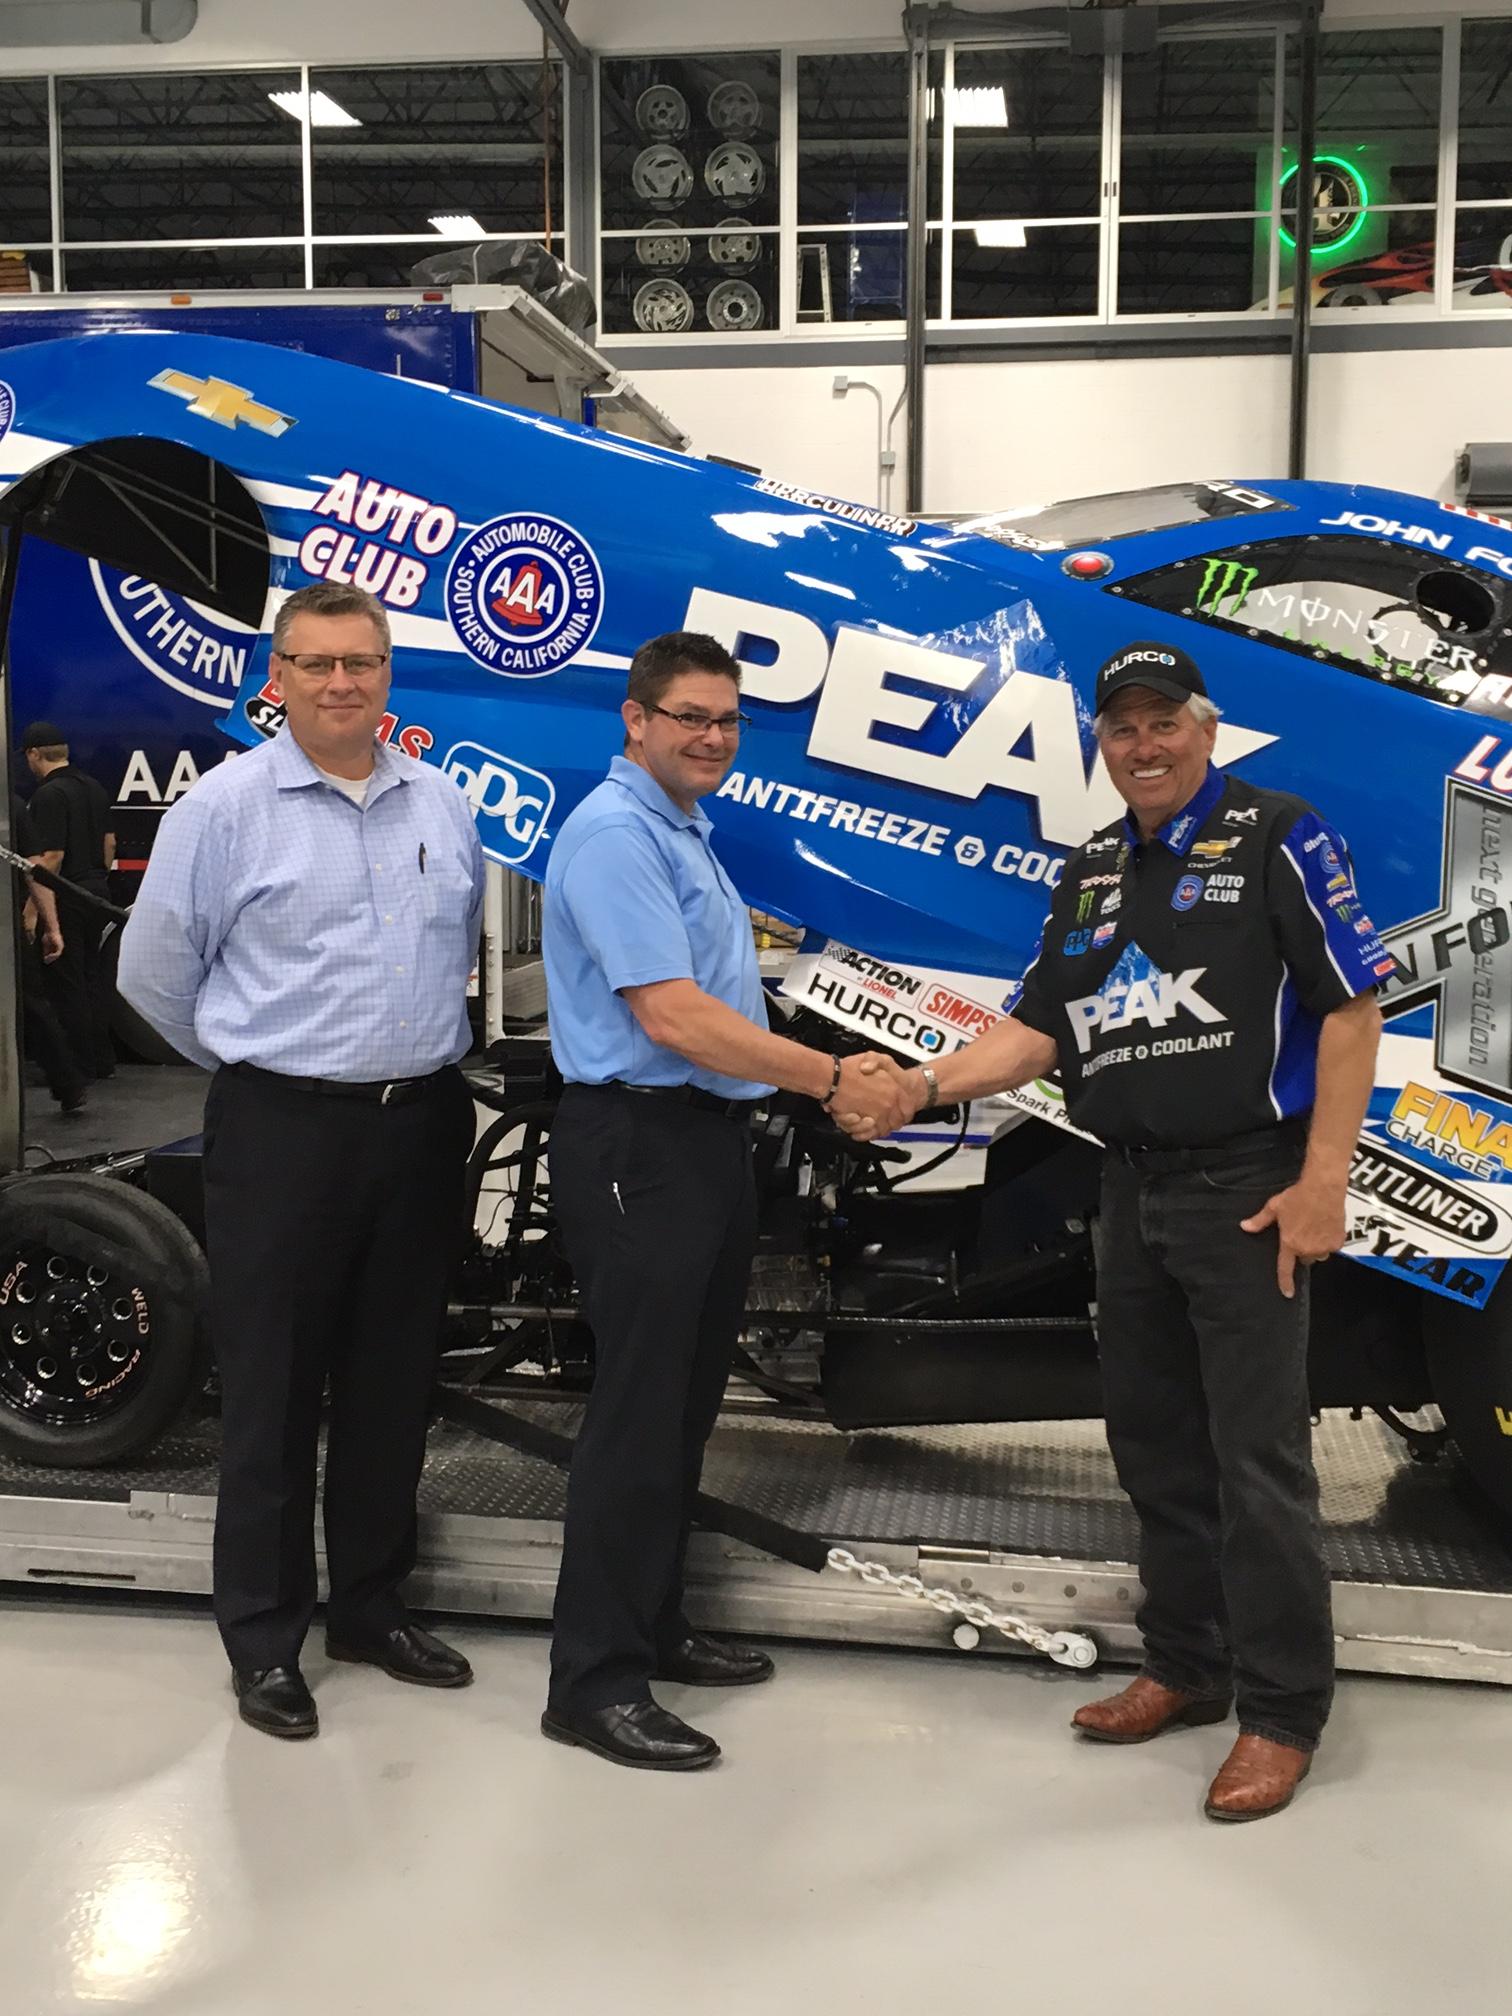 Let's go fast! Hurco Partners with NHRA Legend John Force Racing